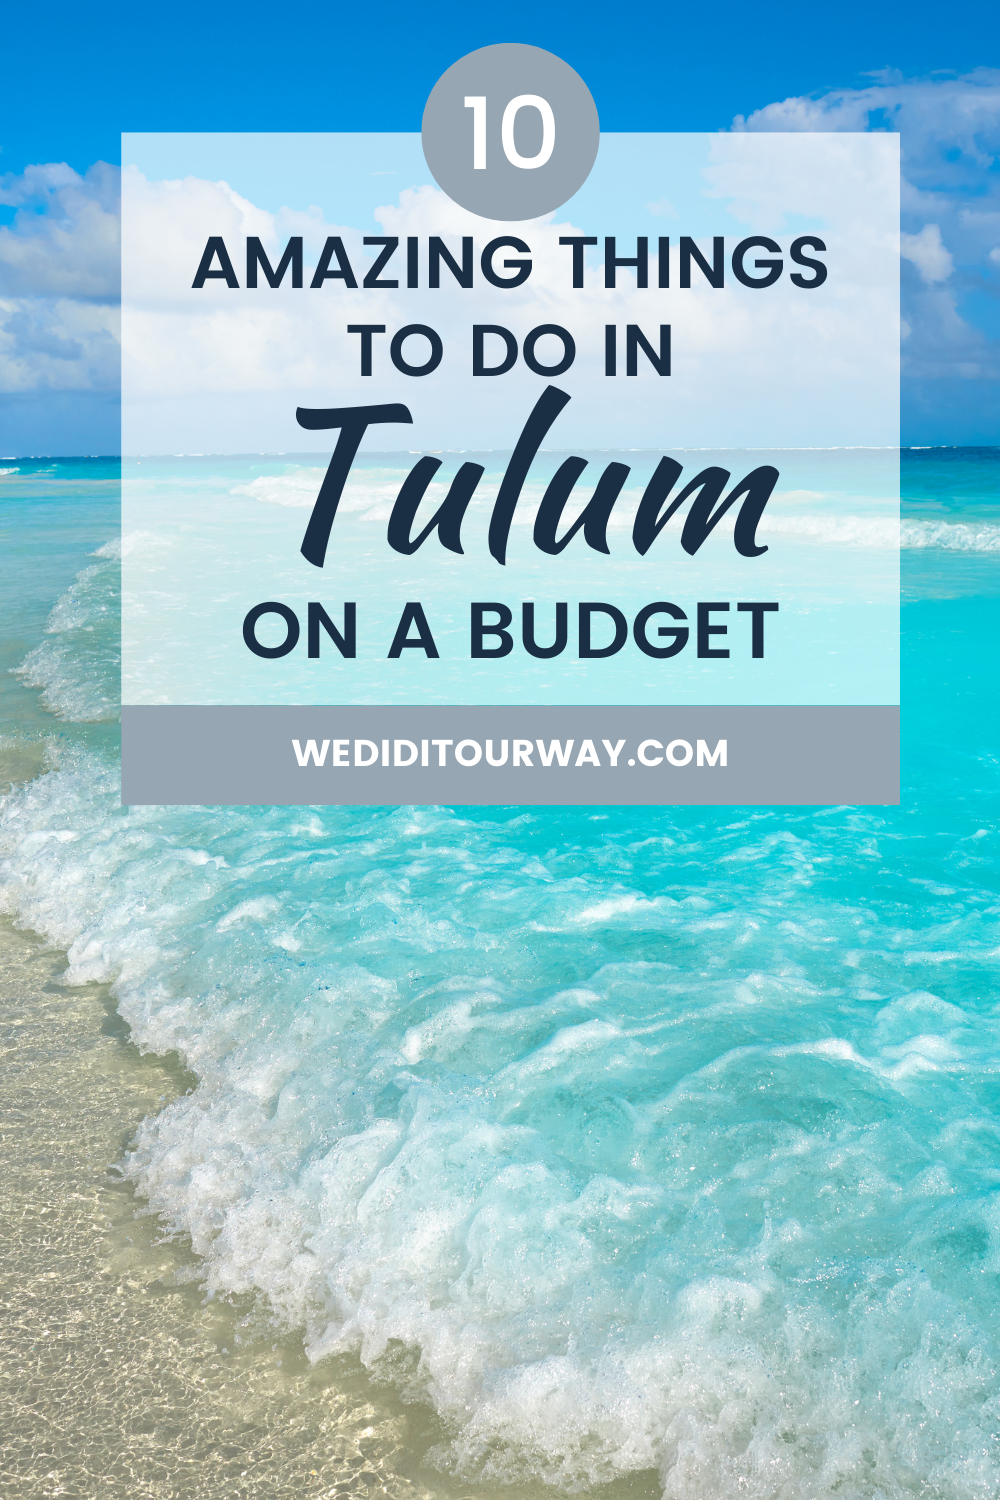 10 things to do in Tulum on a budget